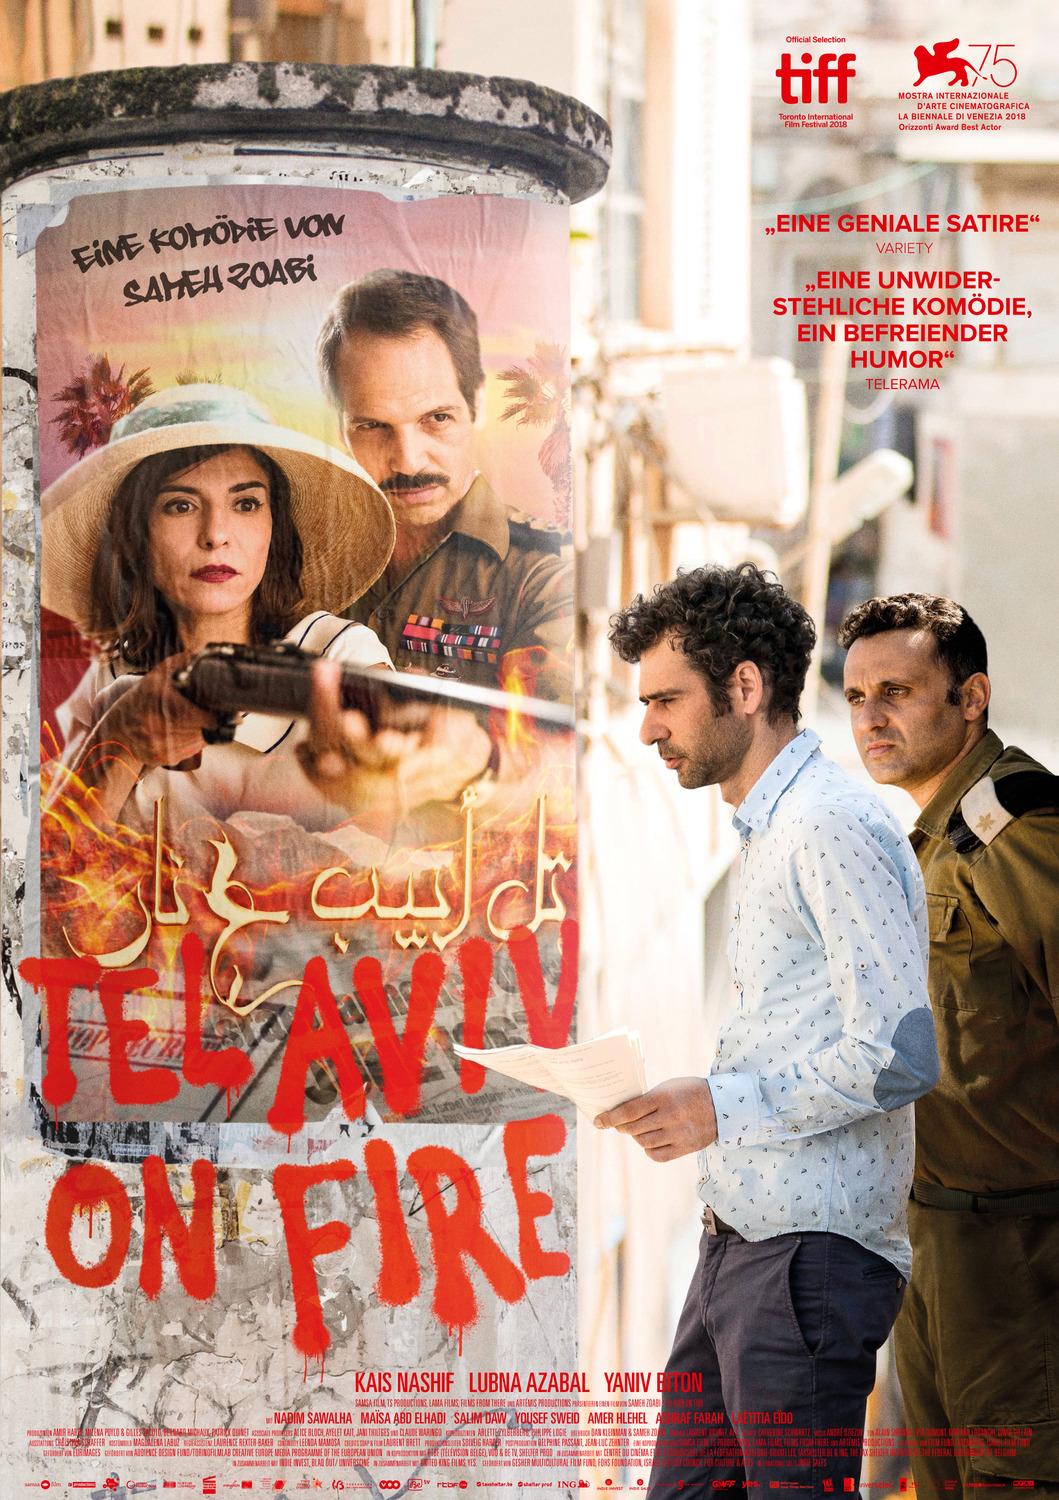 Extra Large Movie Poster Image for Tel Aviv on Fire (#4 of 5)